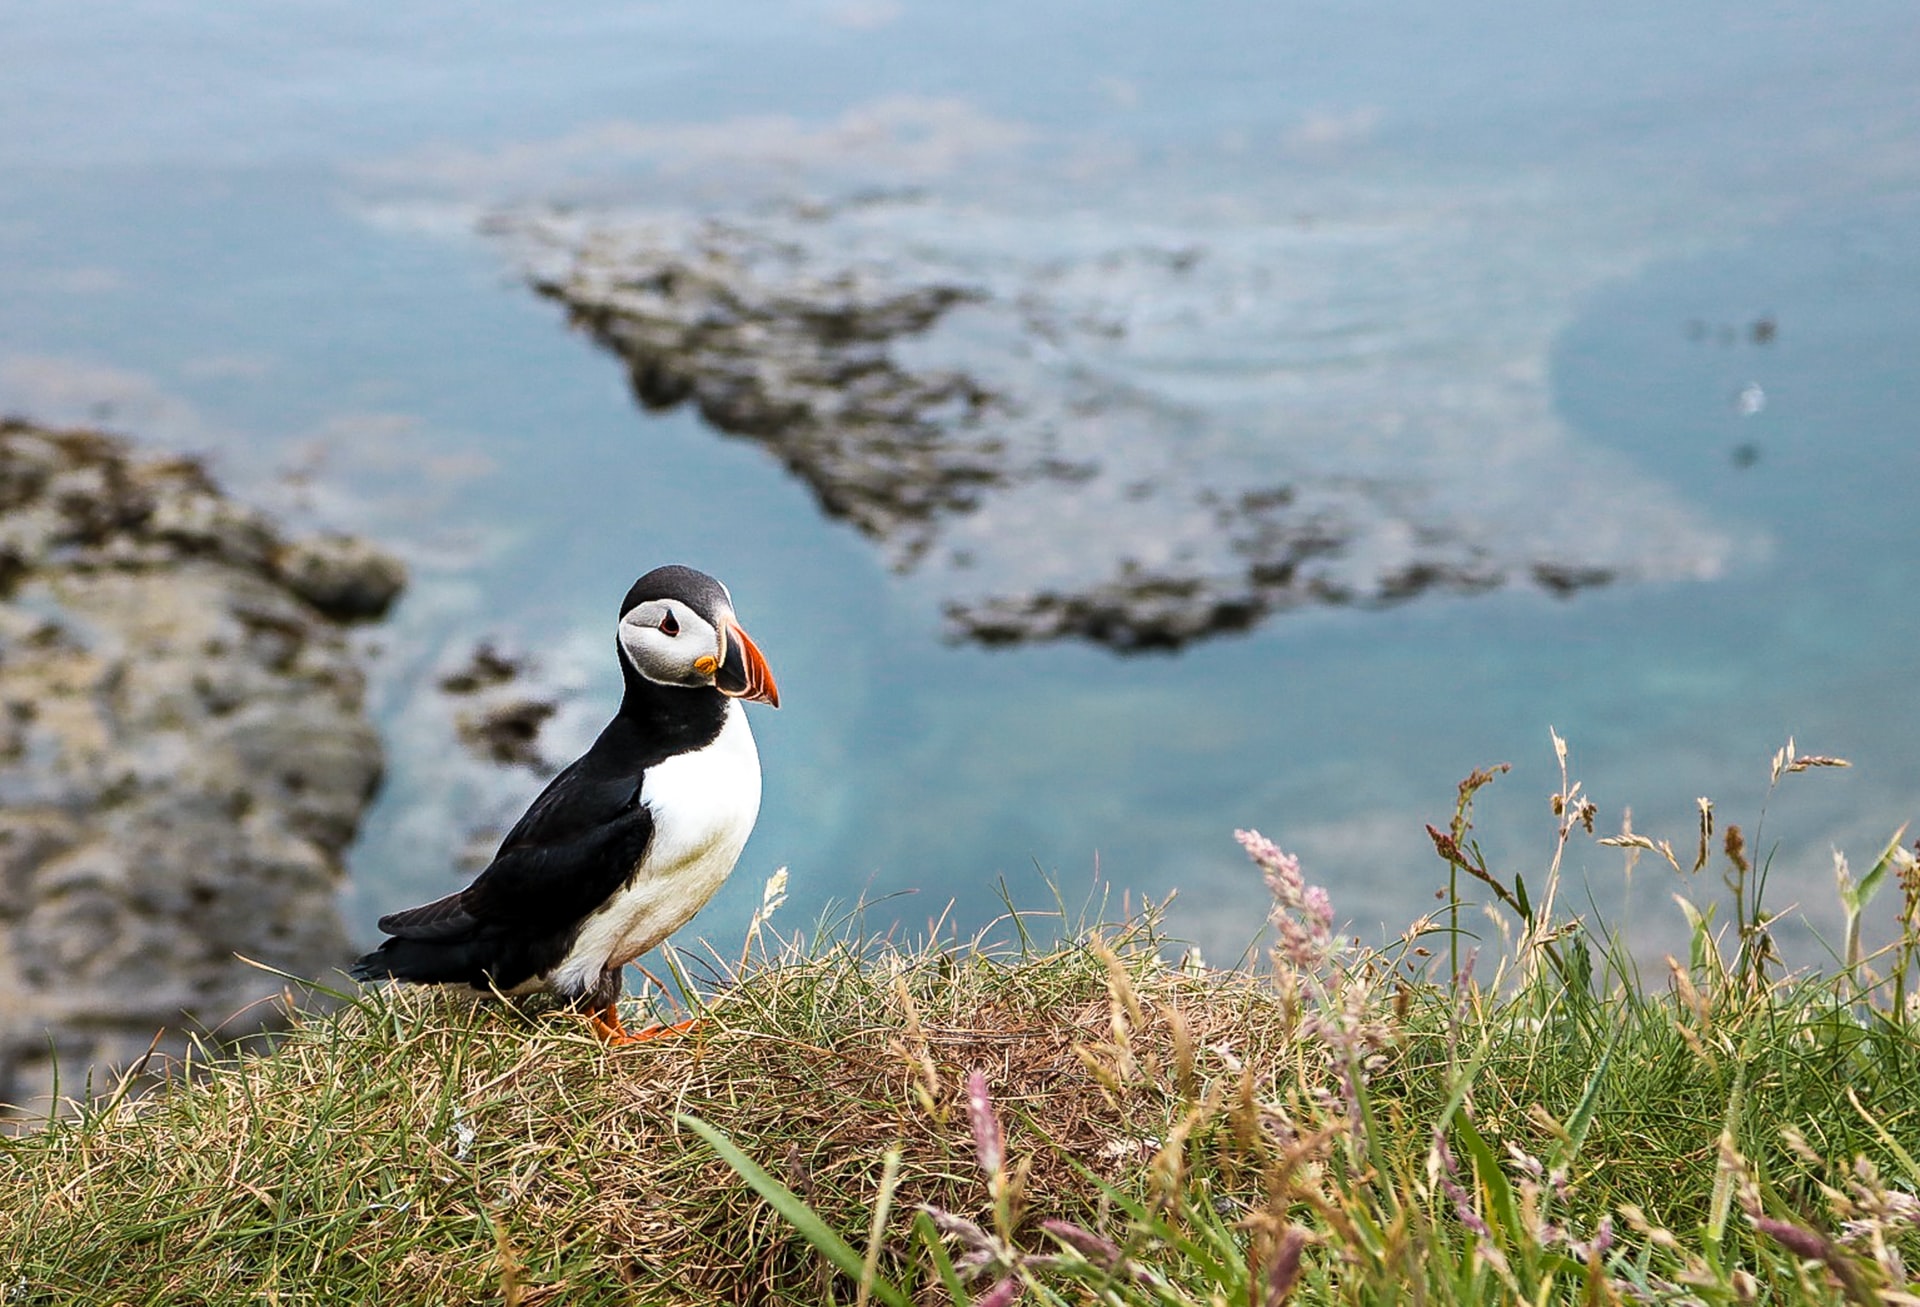 puffin-standing-on-cliffs-with-ocean-in-background-at-isle-of-staffa